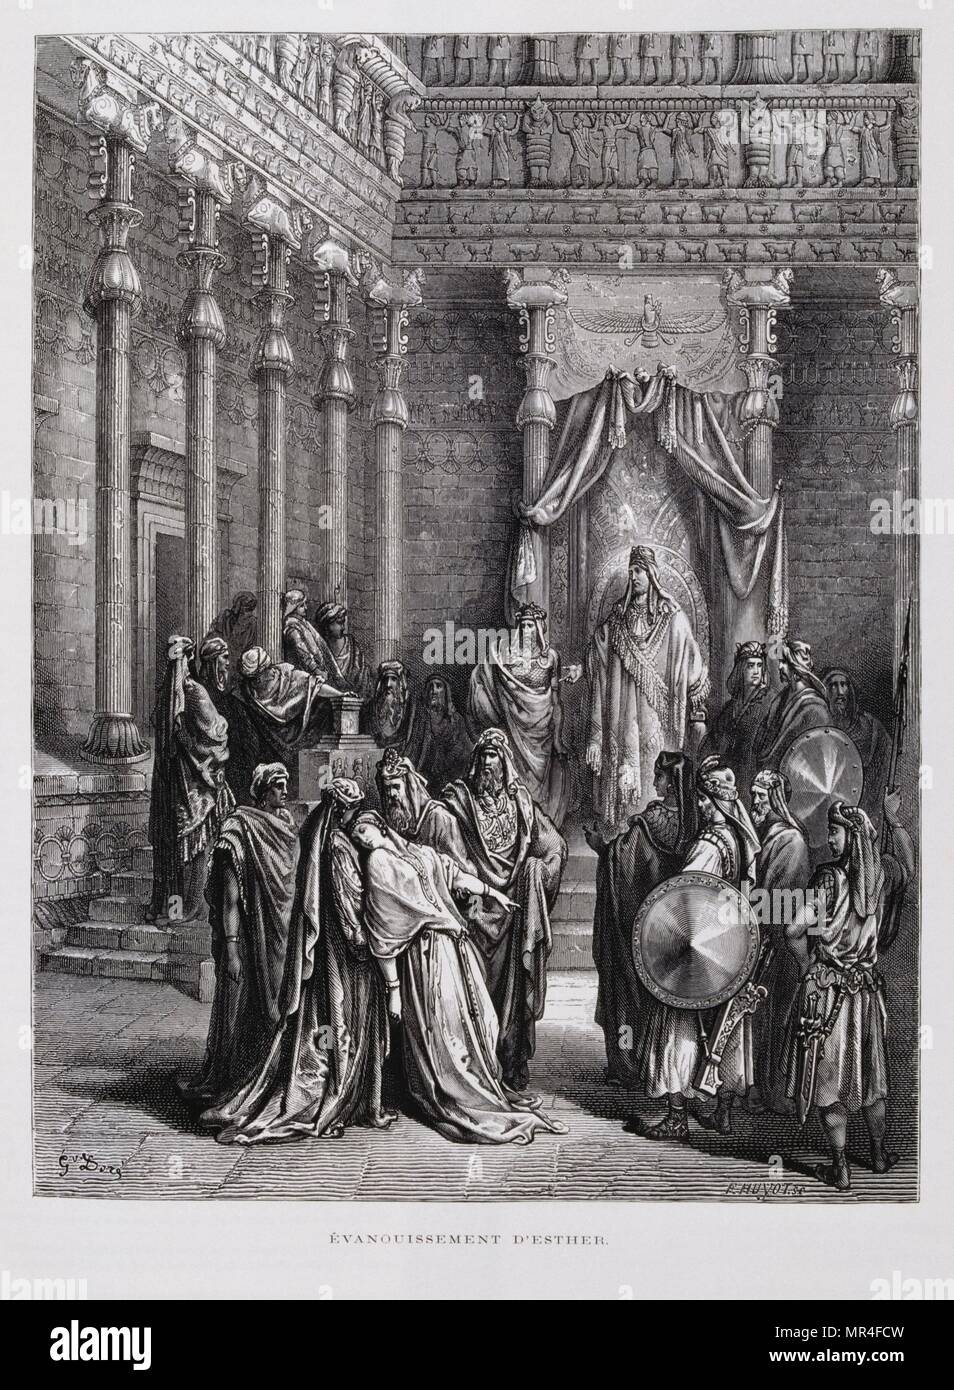 Queen Esther faints before the King, Illustration from the Dore Bible 1866. In 1866, the French artist and illustrator Gustave Dore (1832–1883), published a series of 241 wood engravings for a new deluxe edition of the 1843 French translation of the Vulgate Bible, popularly known as the Bible de Tours. New edition known as La Grande Bible de Tours, illustrations were immensely successful. Scene from Book of Esther (in the Apocrypha), Esther, the Jewish queen of Persia, pleads before her husband Ahasuerus for the repeal of his decree ordering the massacre of all Jews in his kingdom Stock Photo